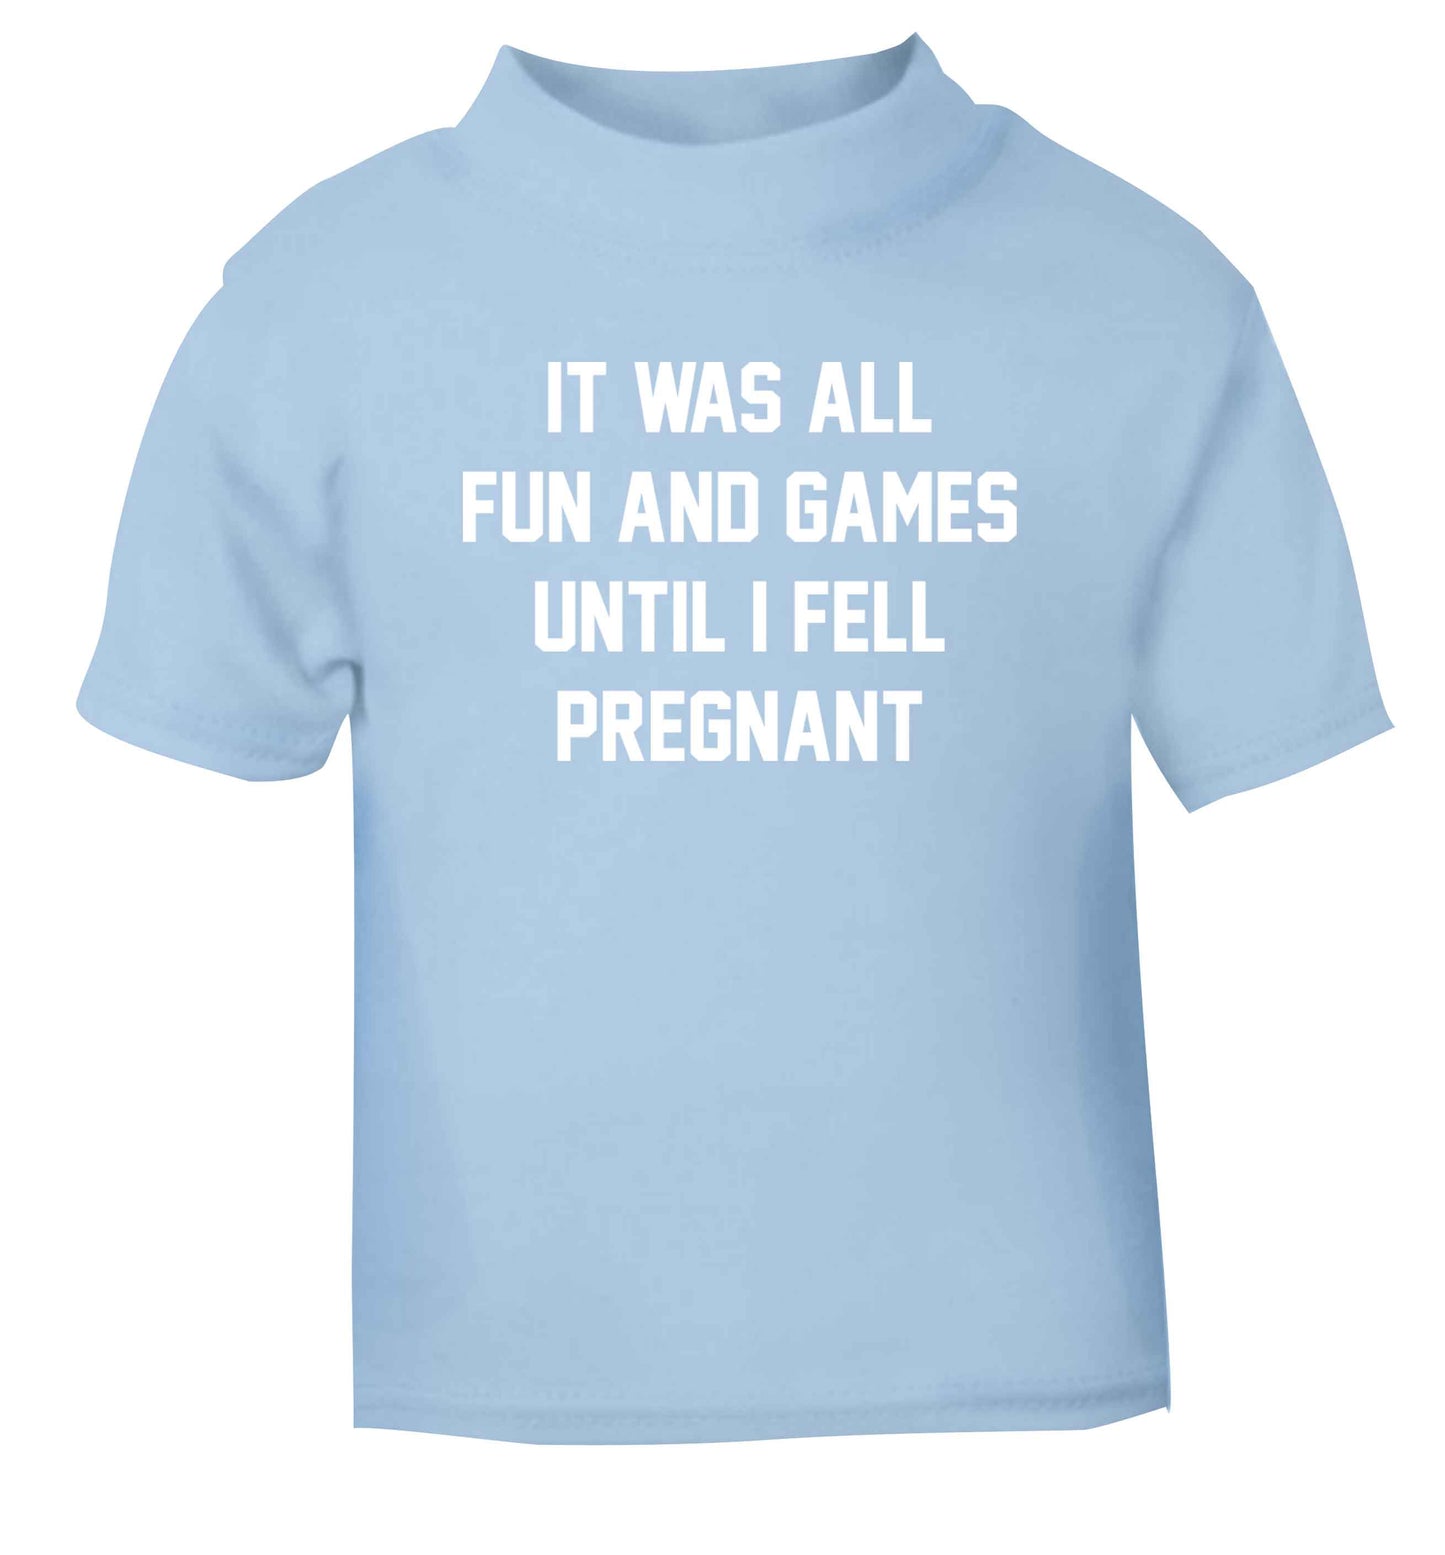 It was all fun and games until I fell pregnant kicks light blue Baby Toddler Tshirt 2 Years